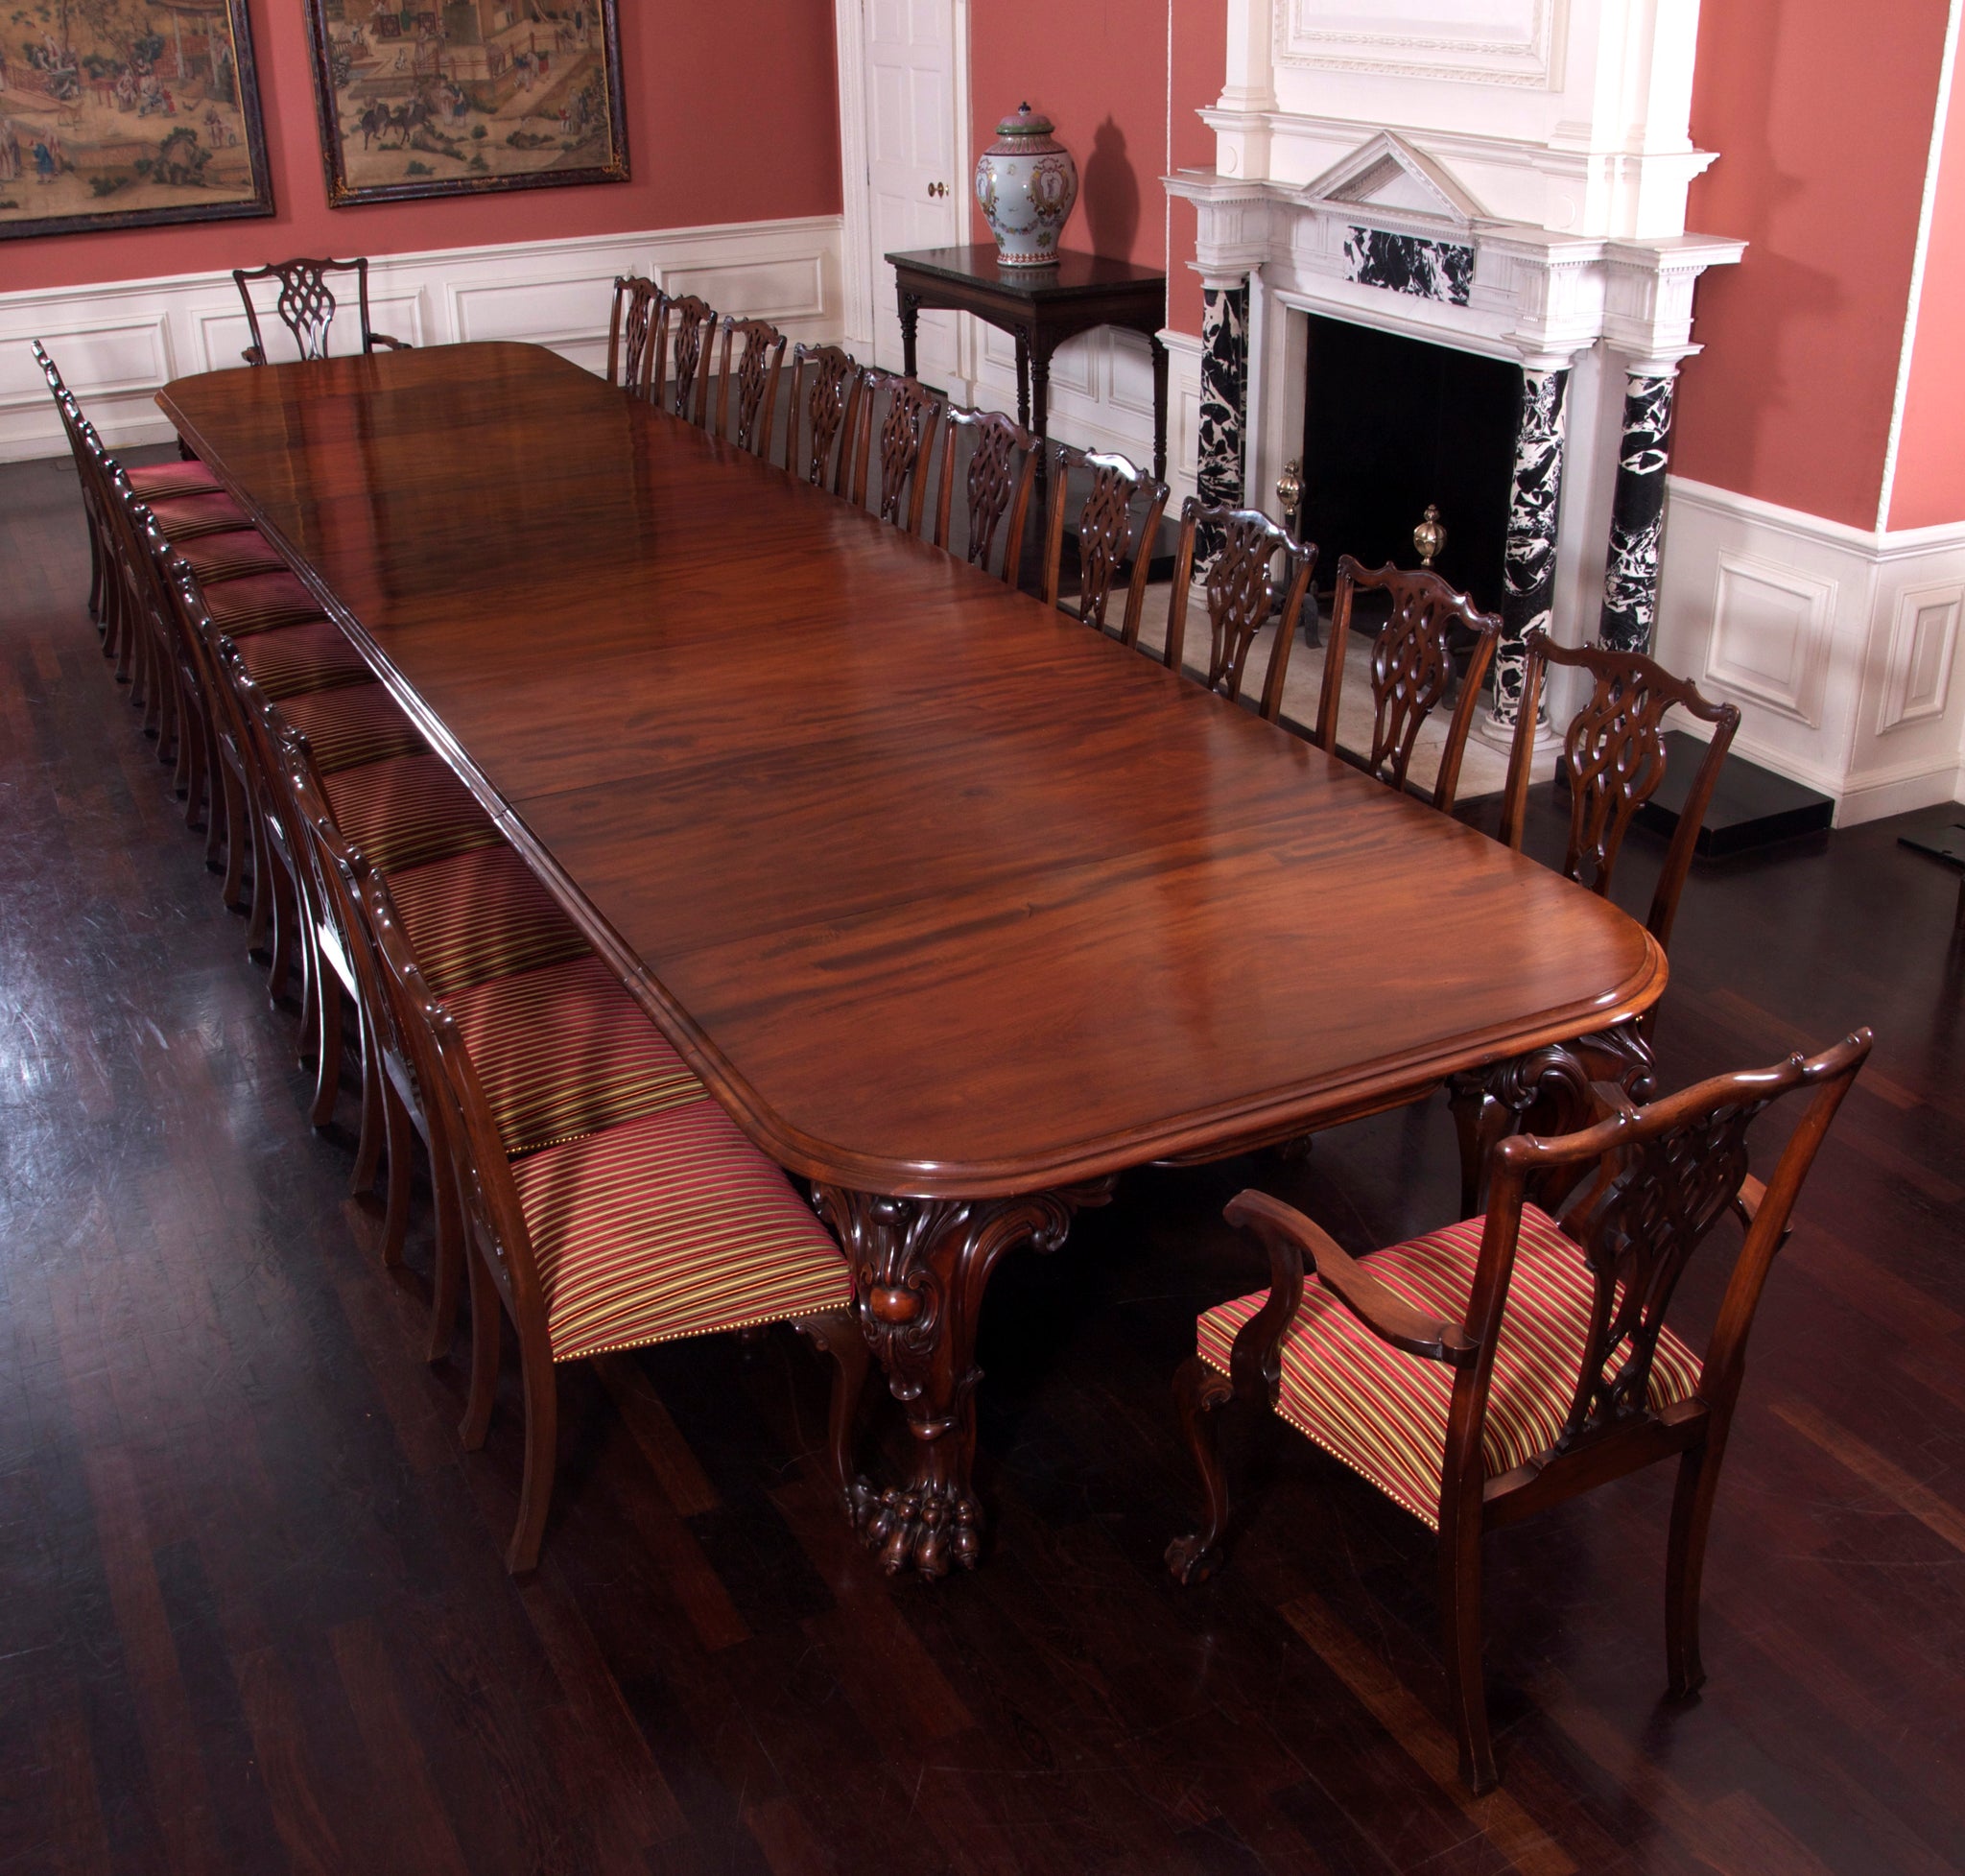 A Huge Cuban Mahogany Dining Table of Outstanding Quality